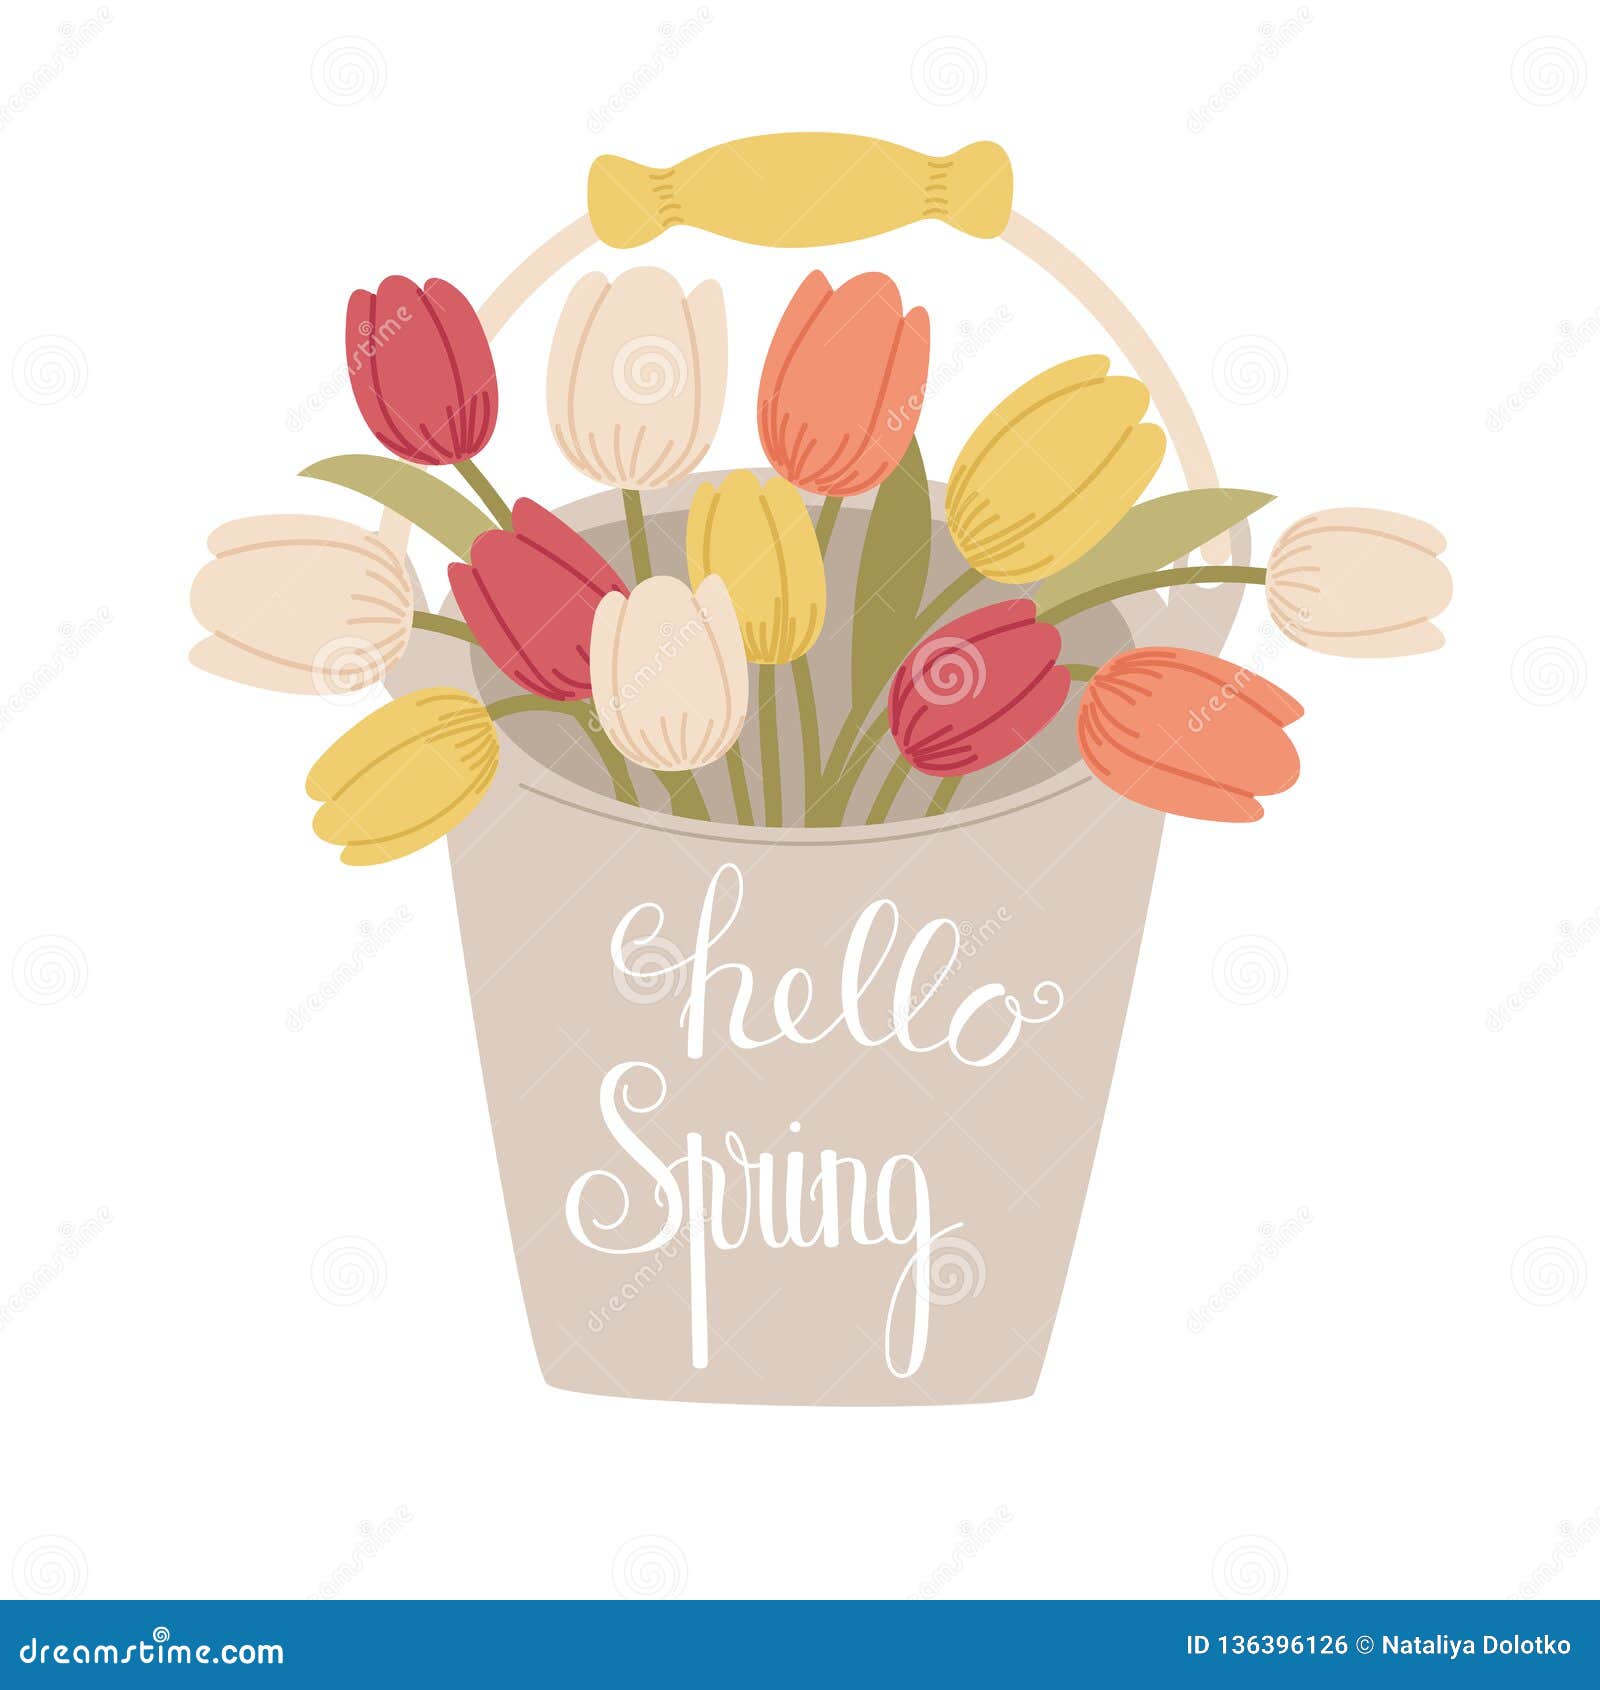 hello spring handlettering on the bucket of tulips